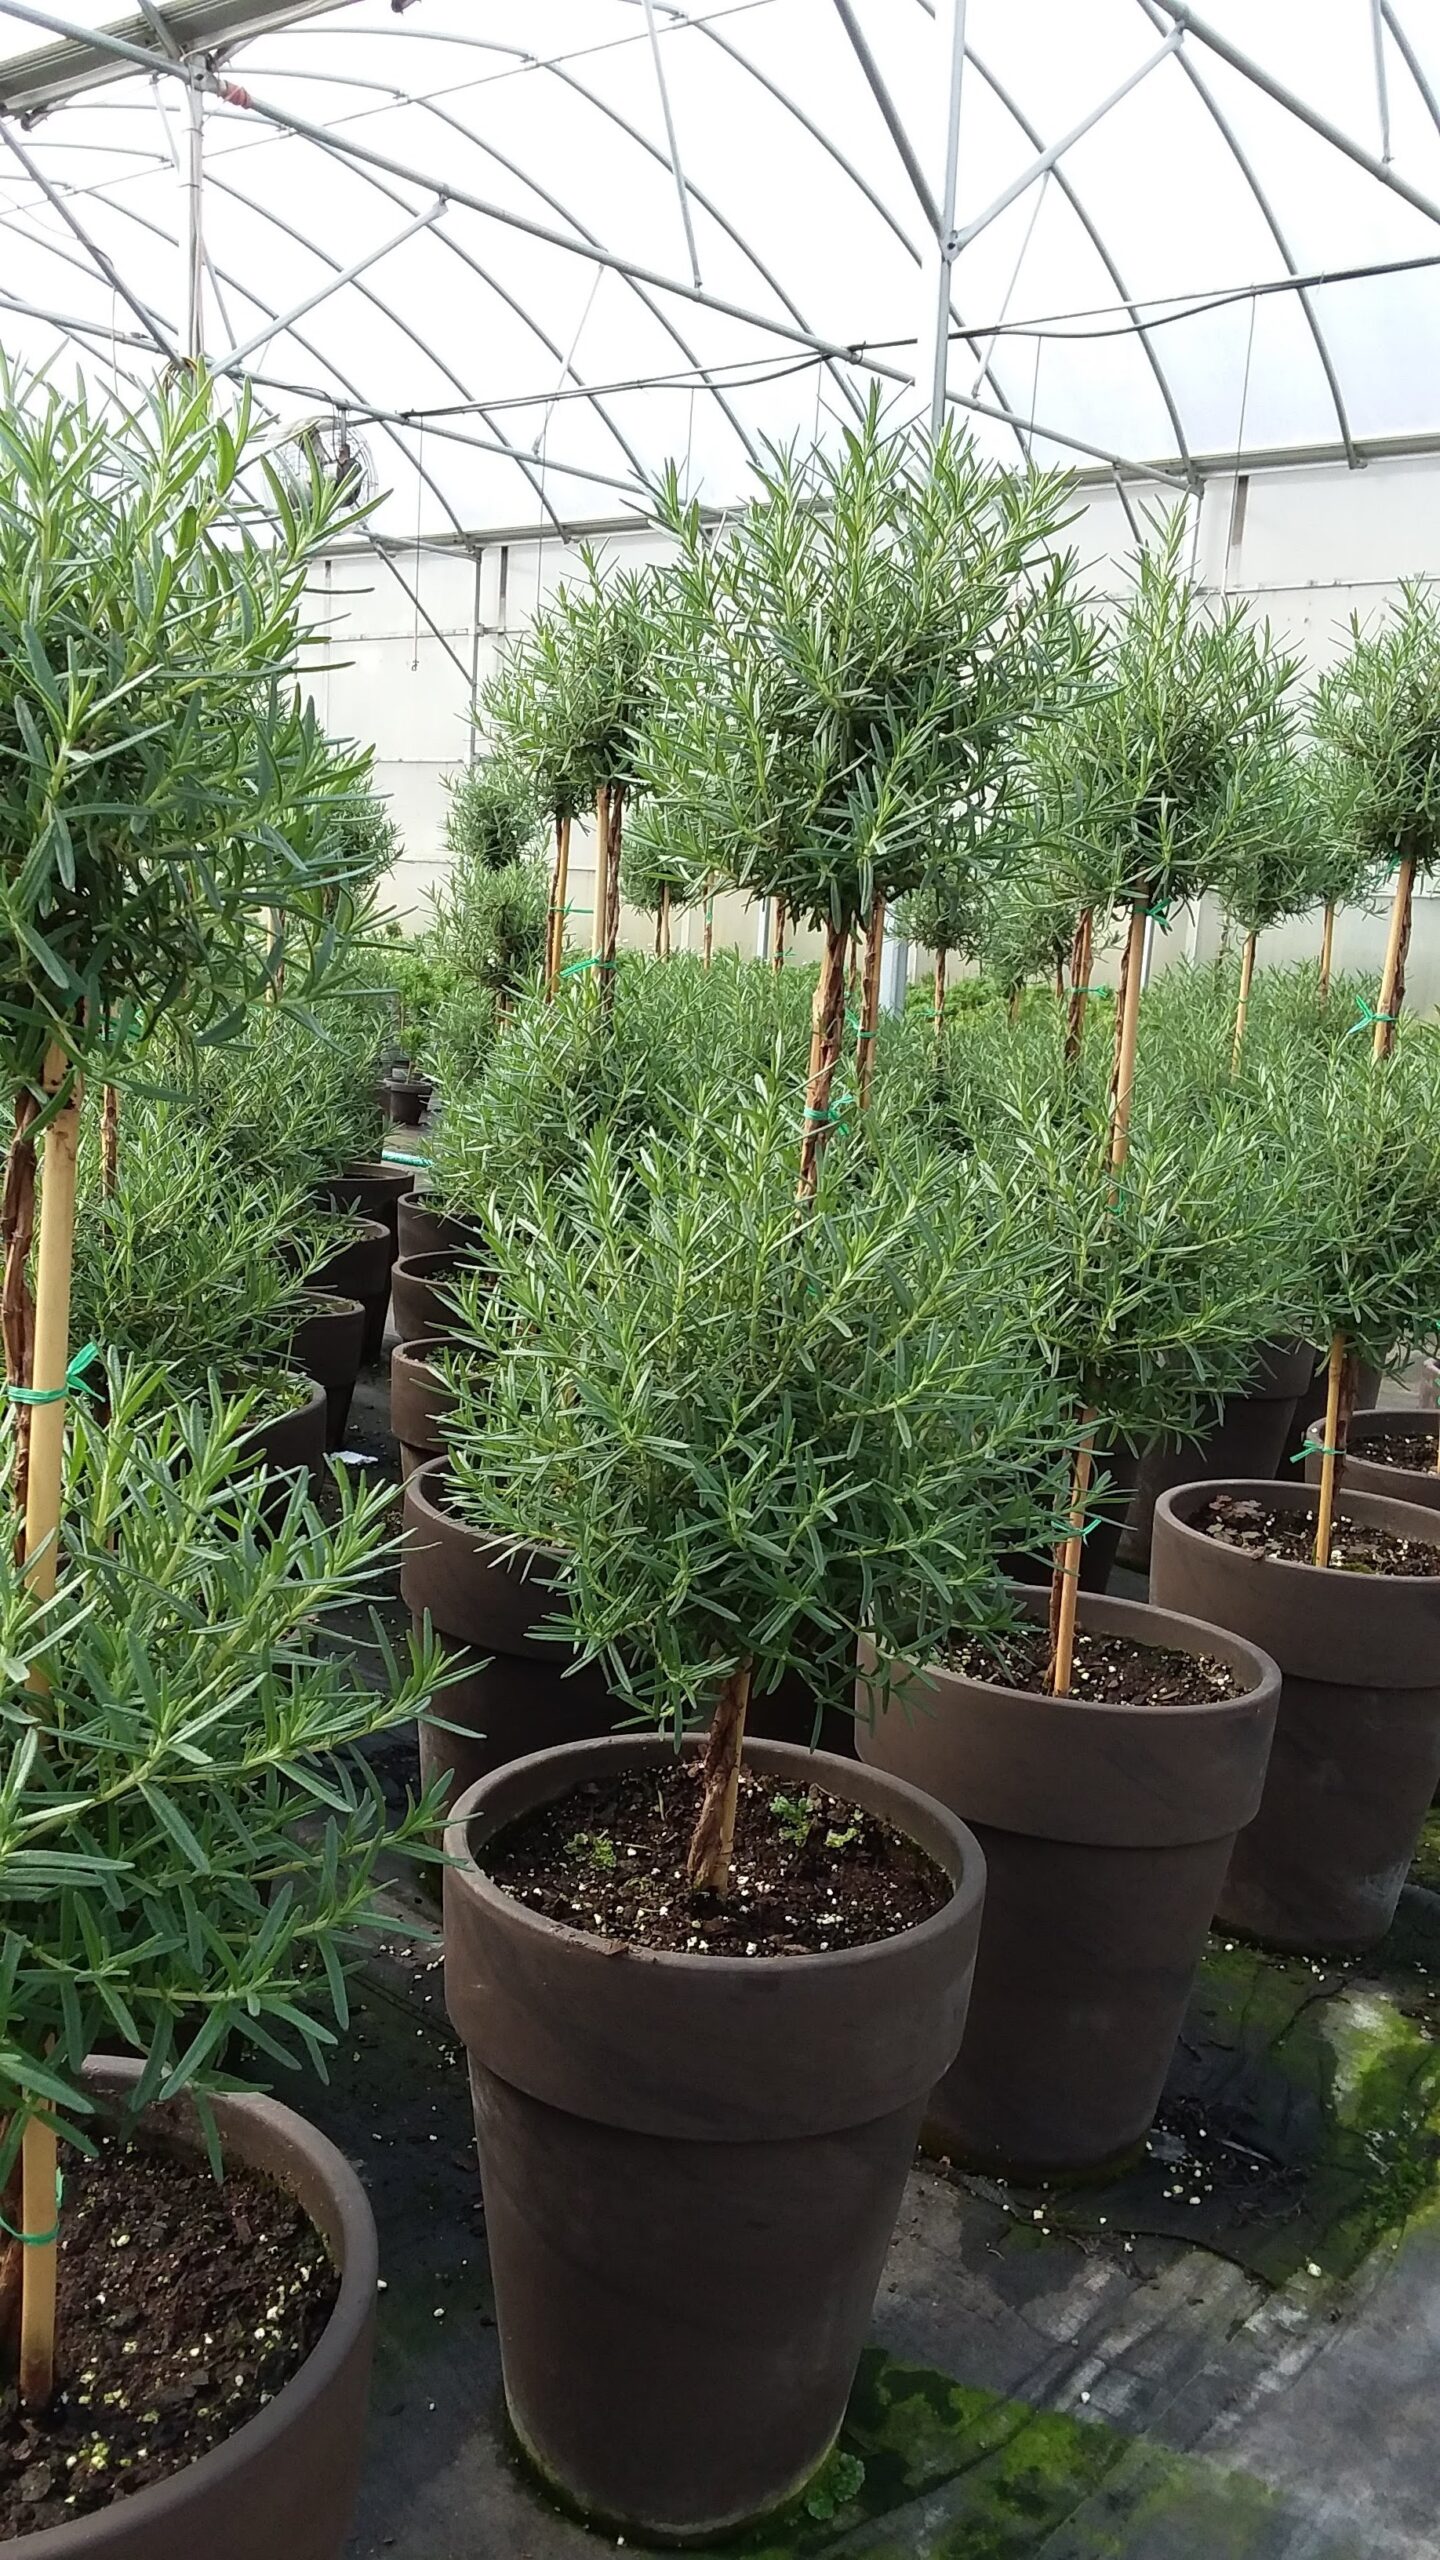 rows of double globe Rosemary topiaries in brown clay pots